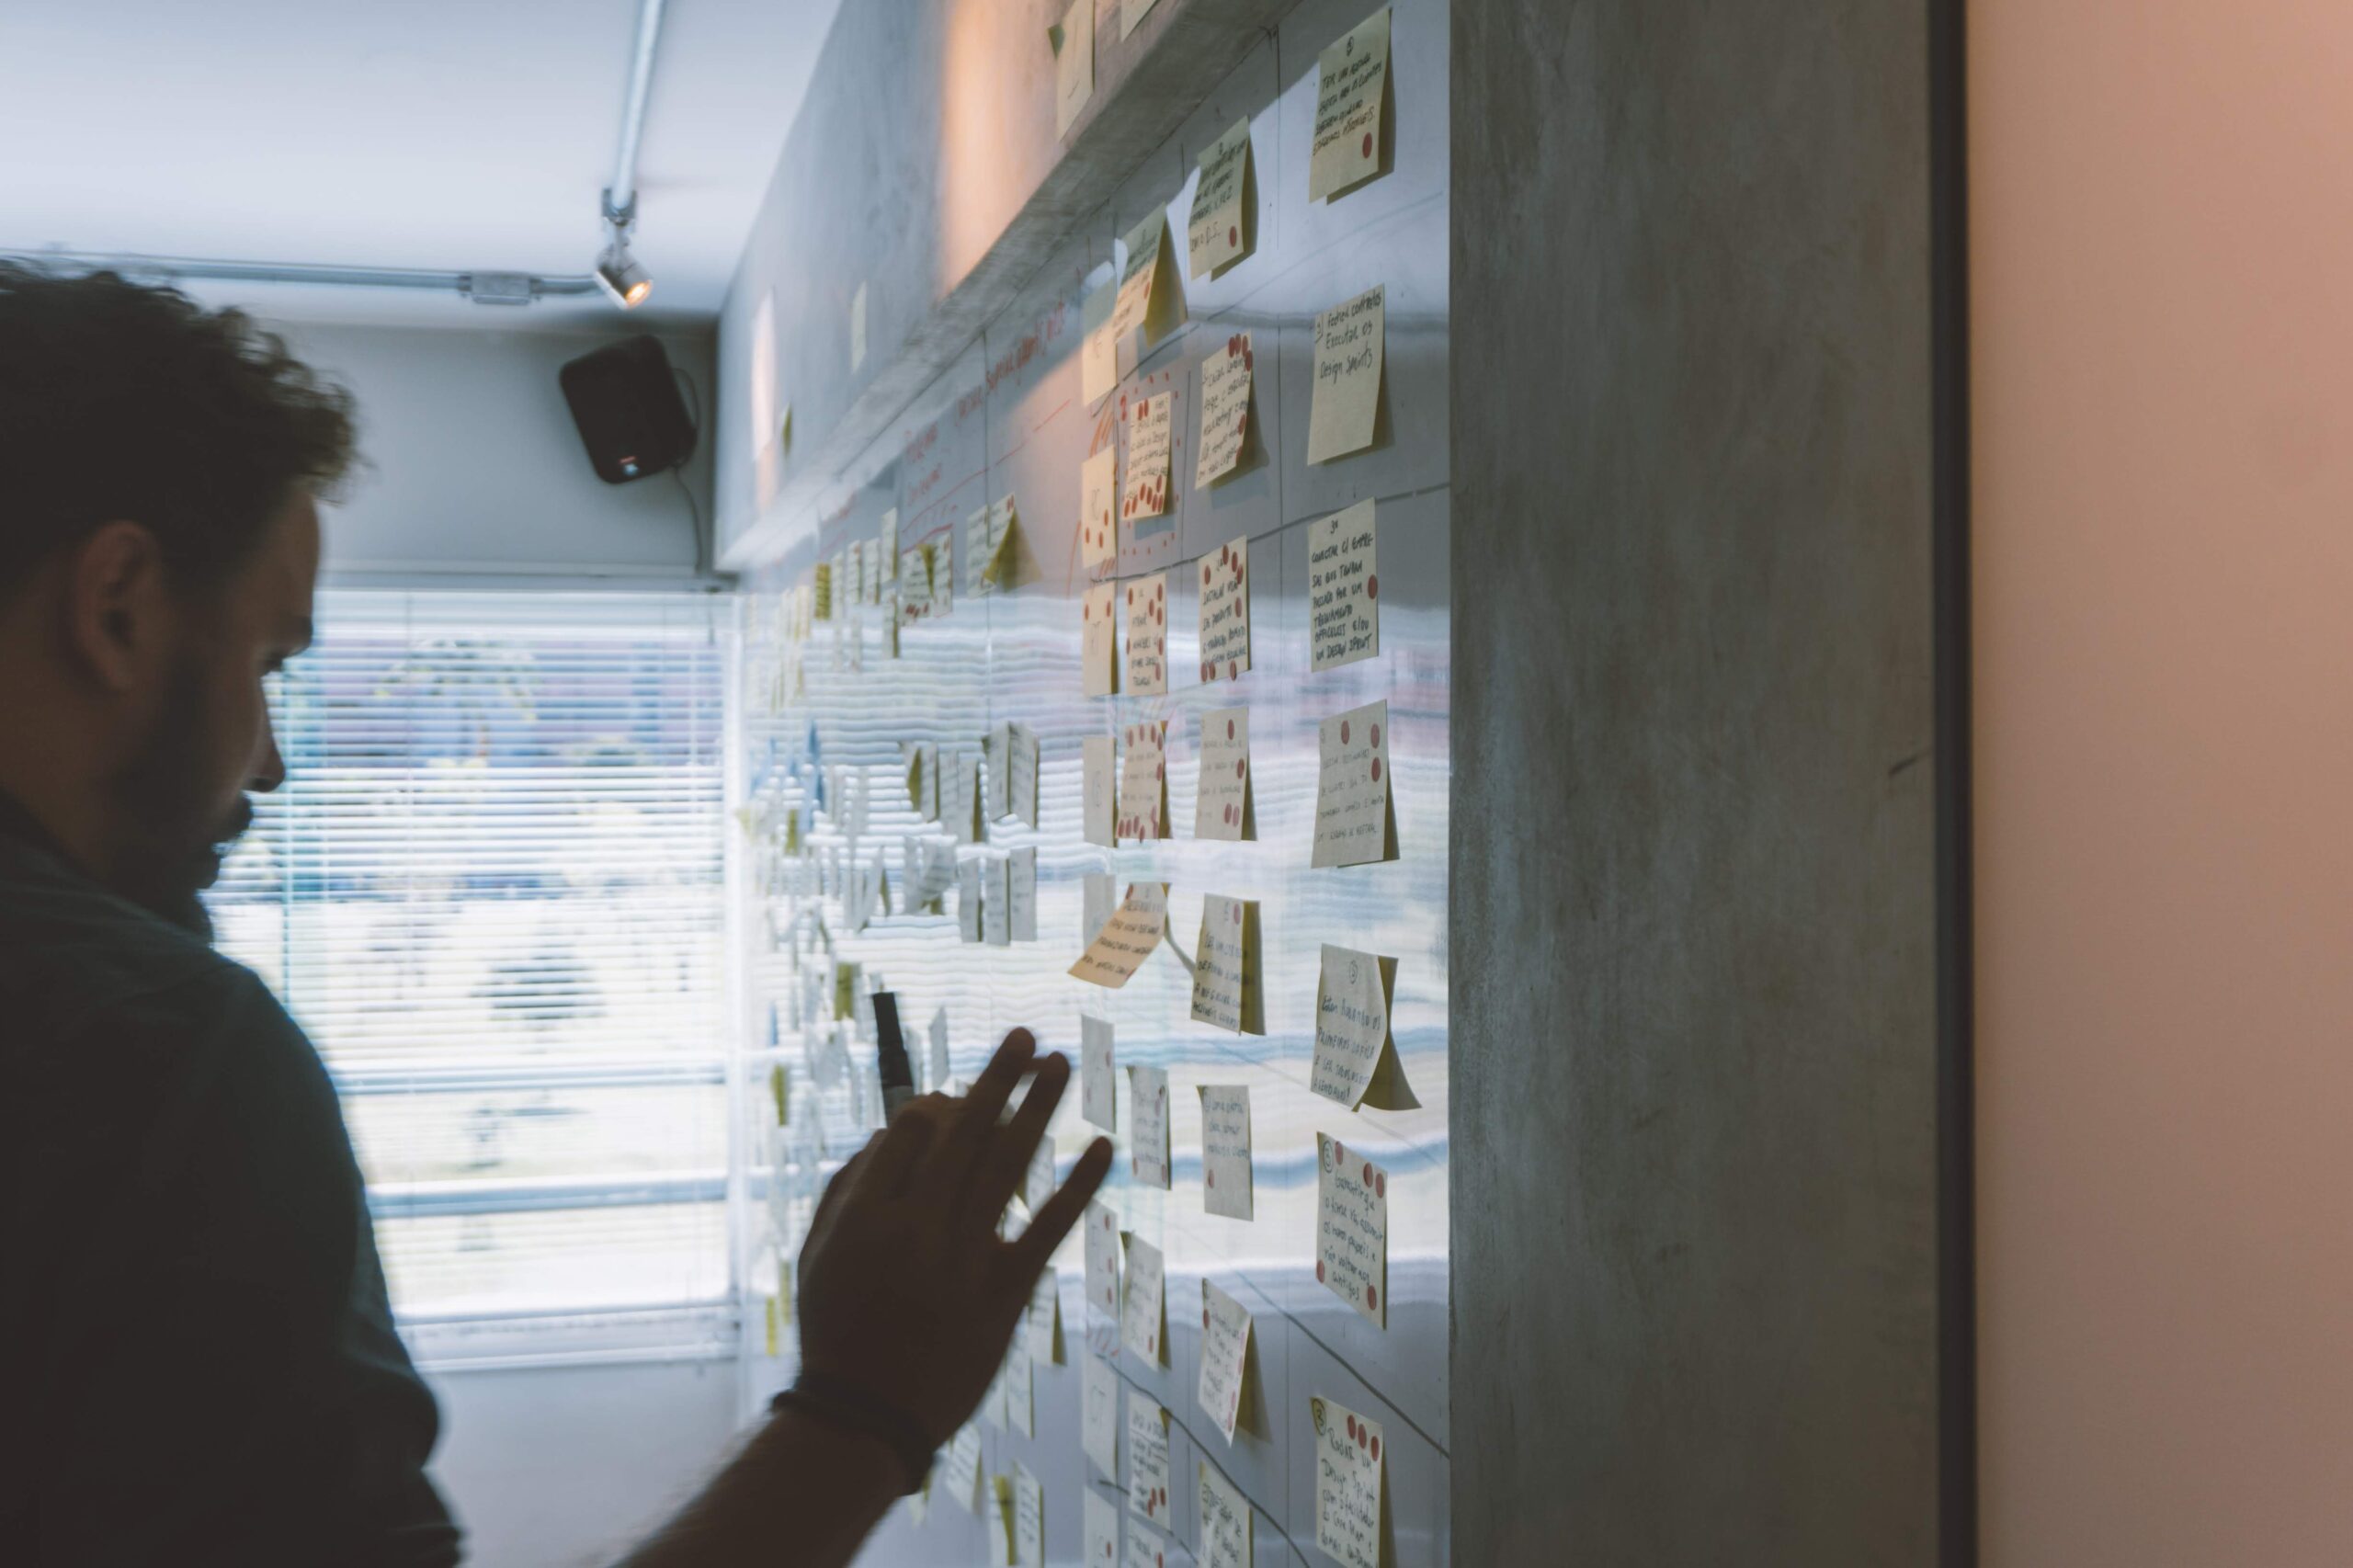 A team examine post it notes on a wall as part of a design sprint 2.0